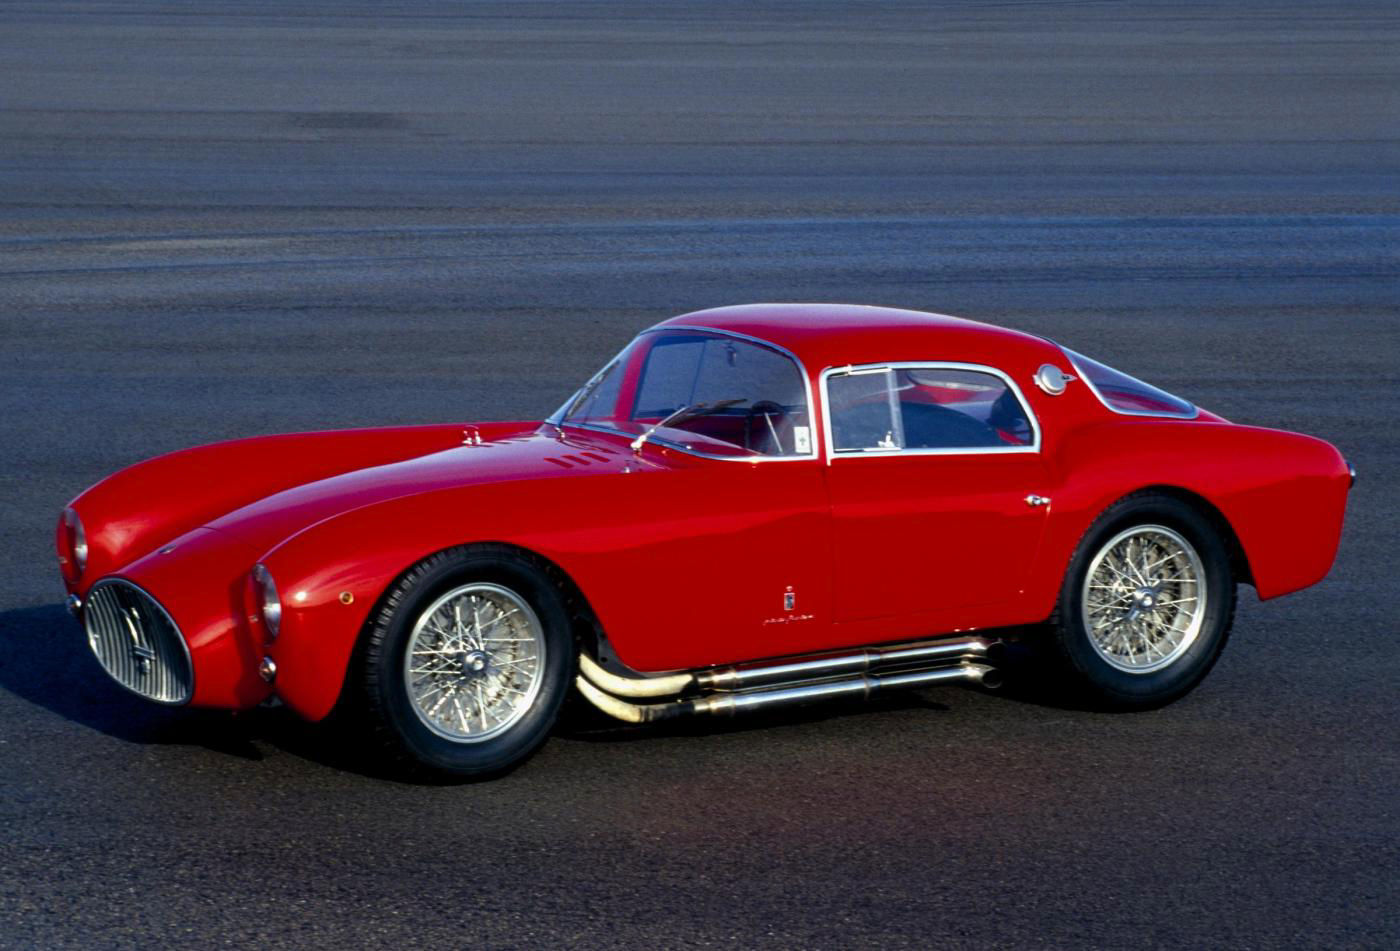 1953 Maserati 2000 Sport - A6GCS Berlinetta - exterior view of the classic 2-seater